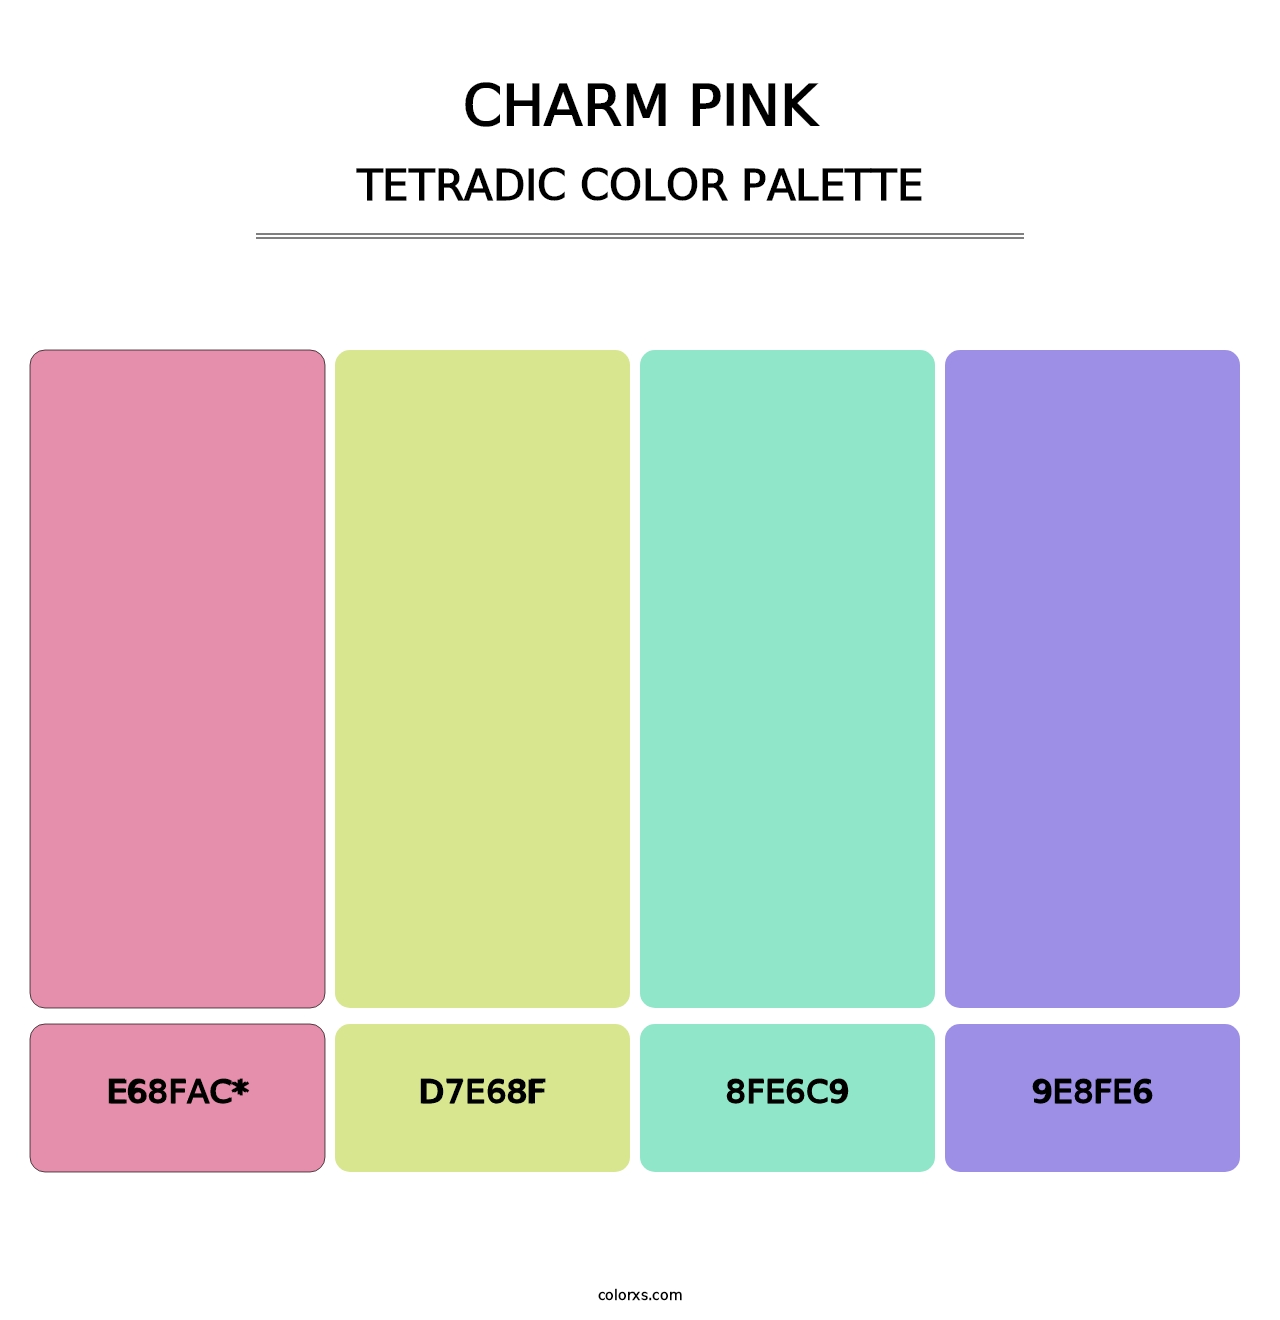 Charm Pink - Tetradic Color Palette